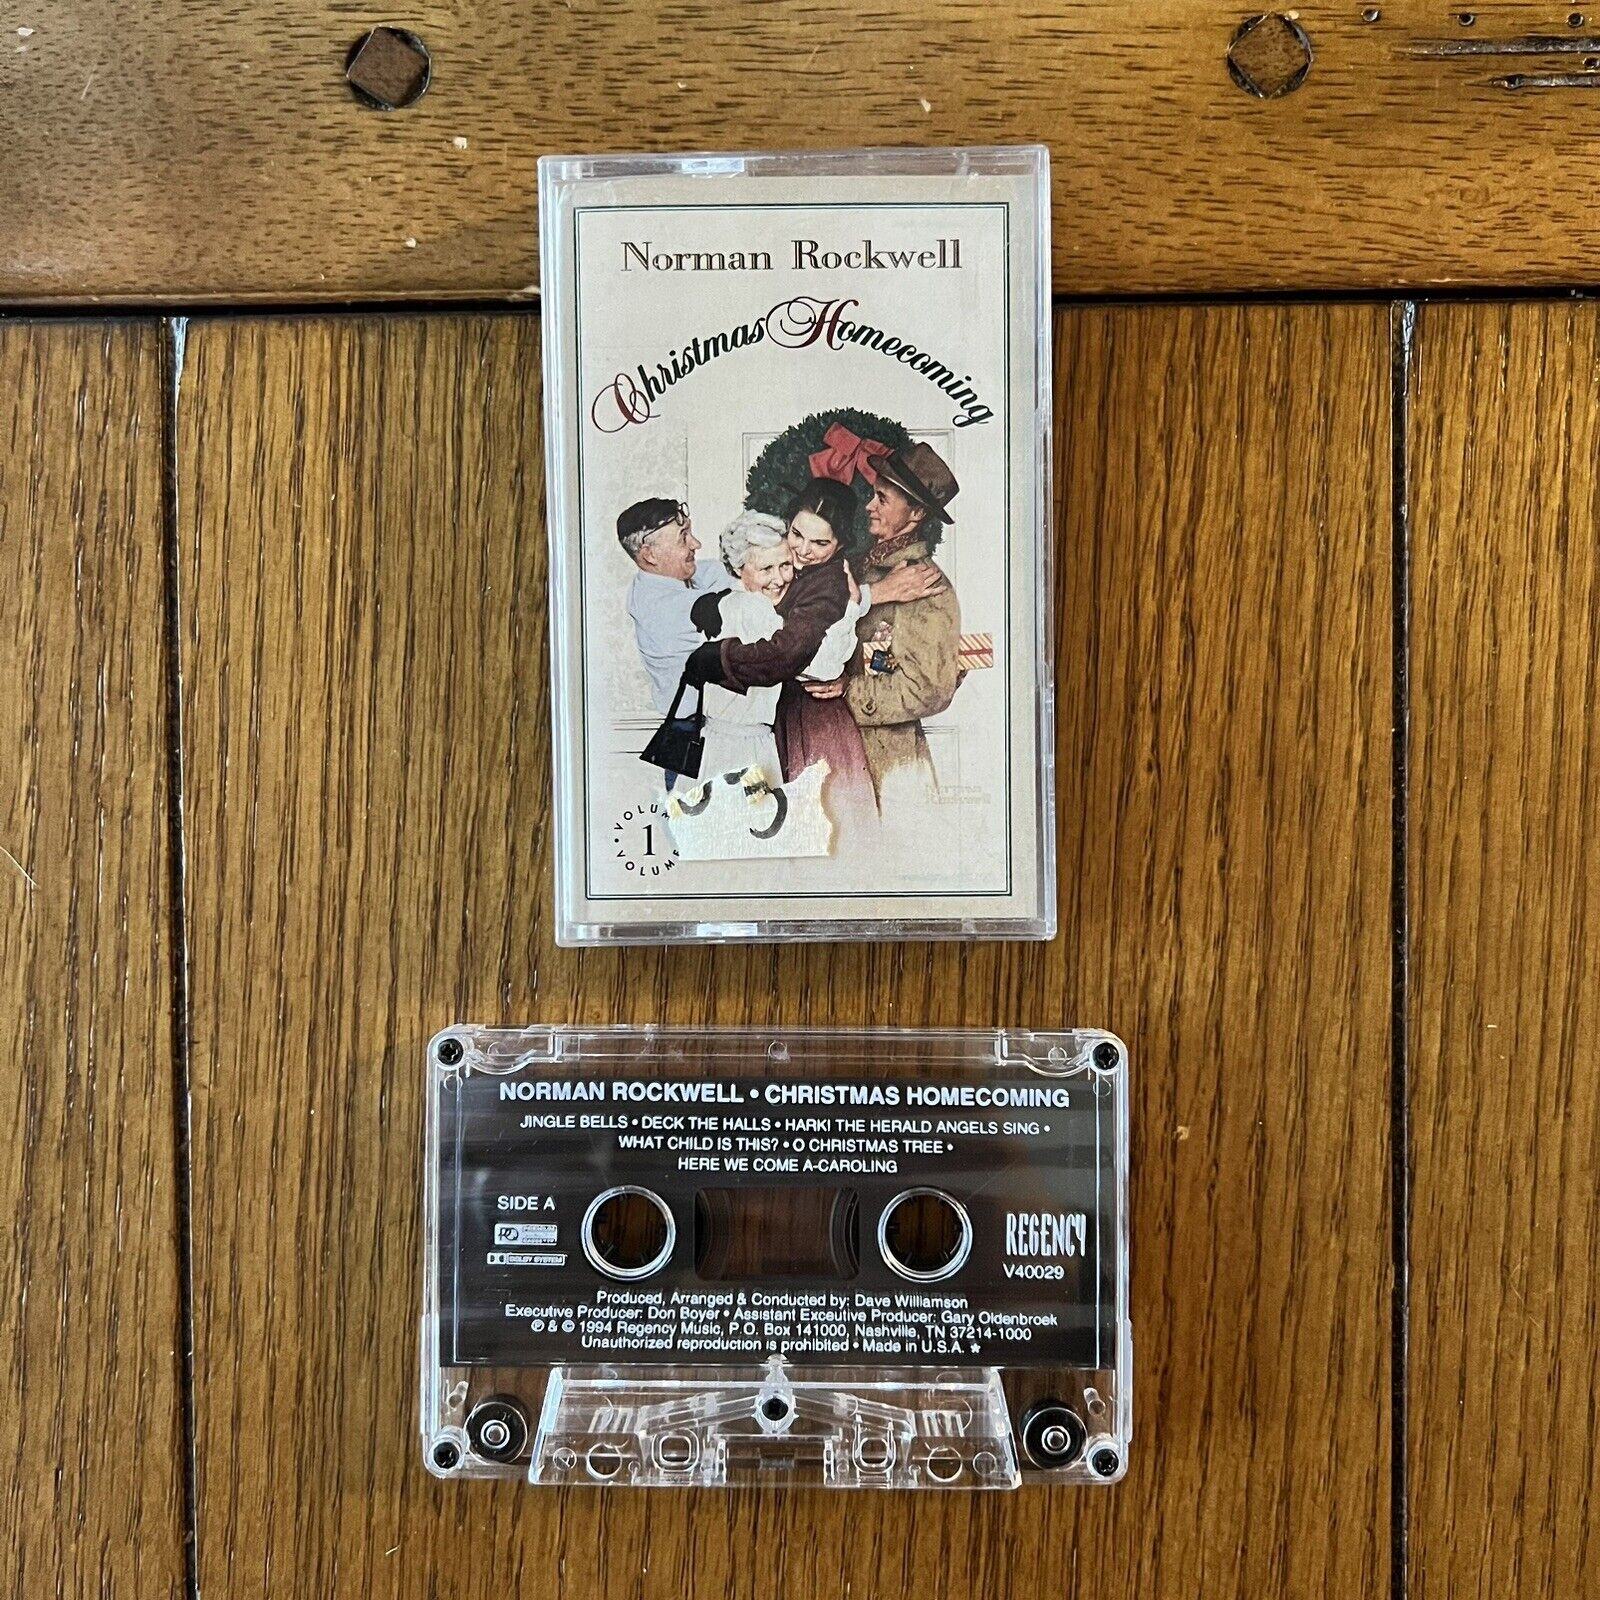 Norman Rockwell Christmas Homecoming Cassette Tape